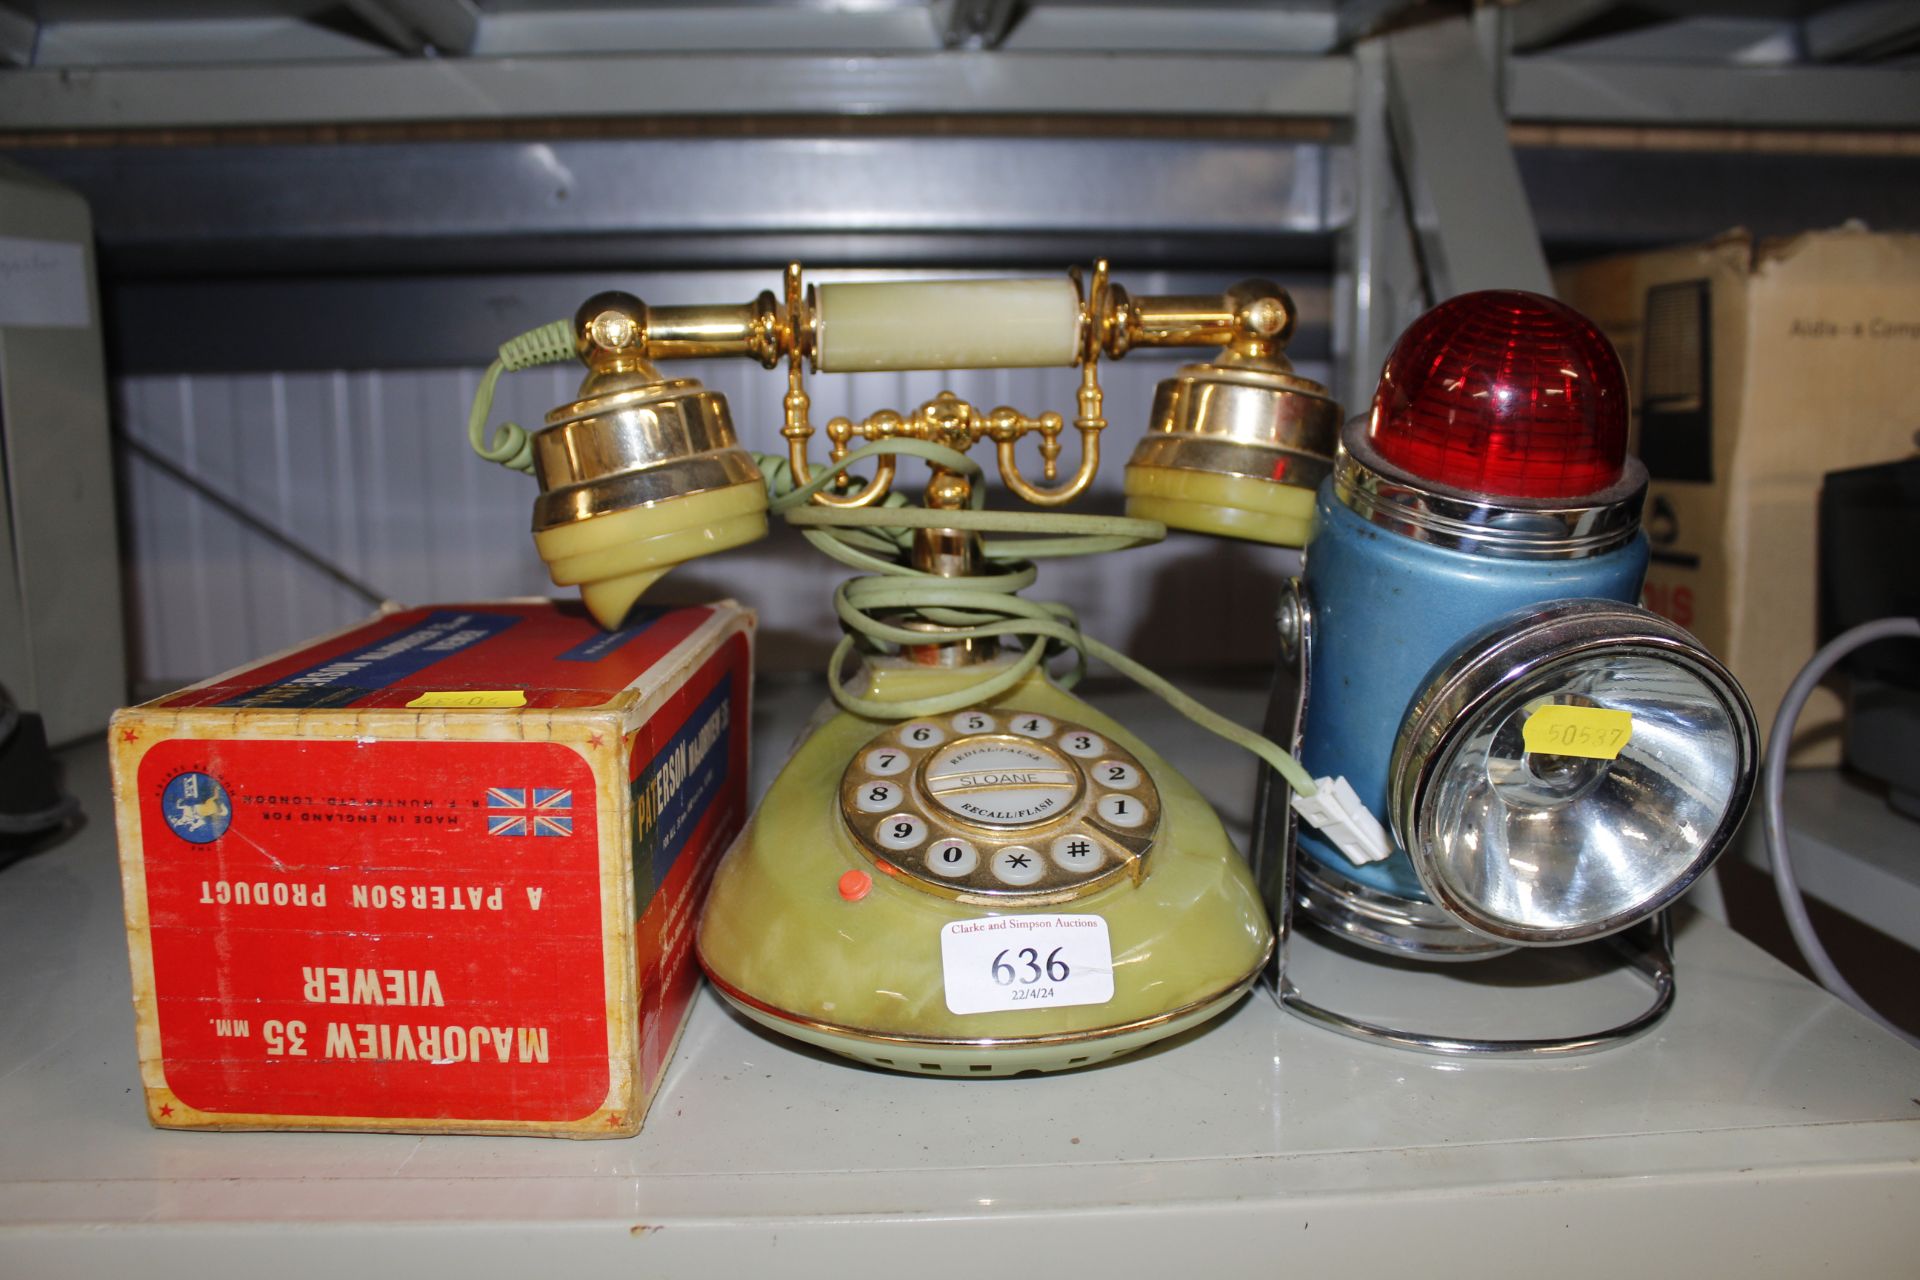 An onyx effect telephone; a Patterson viewer and a